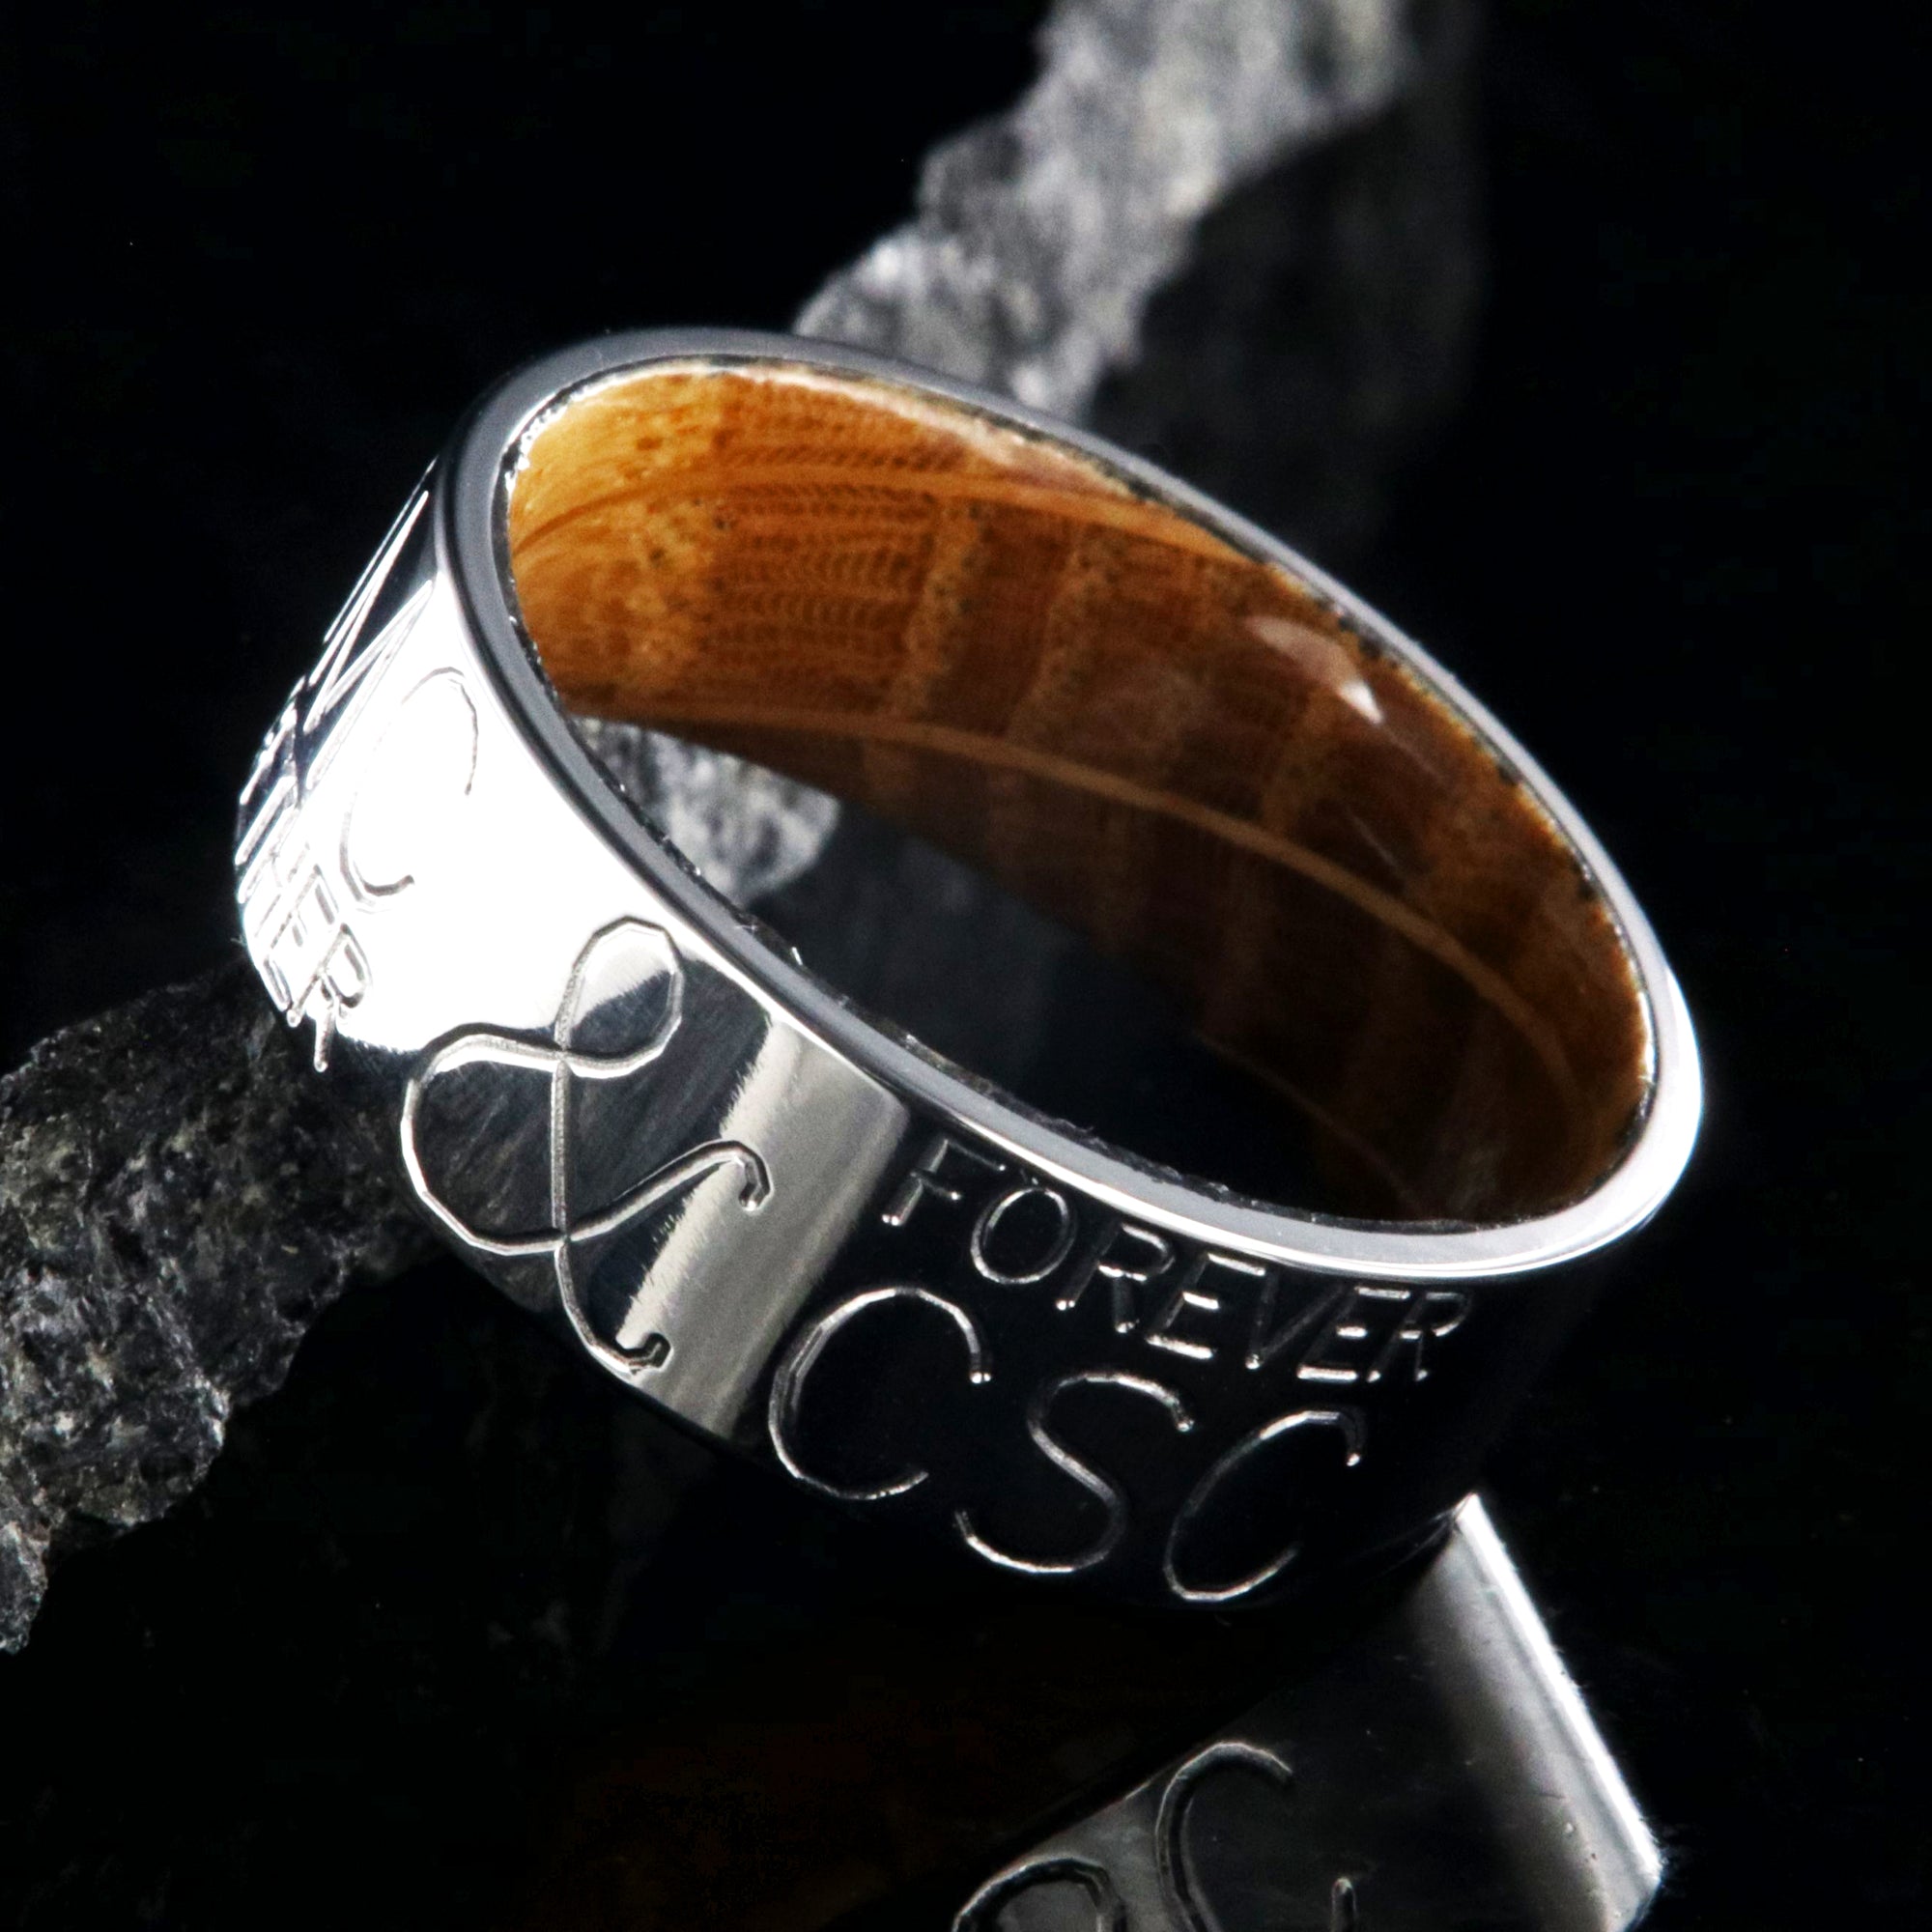 8mm wide personalized duck band ring; polished titanium with two lines of text on either side of an &; polished Jack Daniel's whiskey barrel sleeve